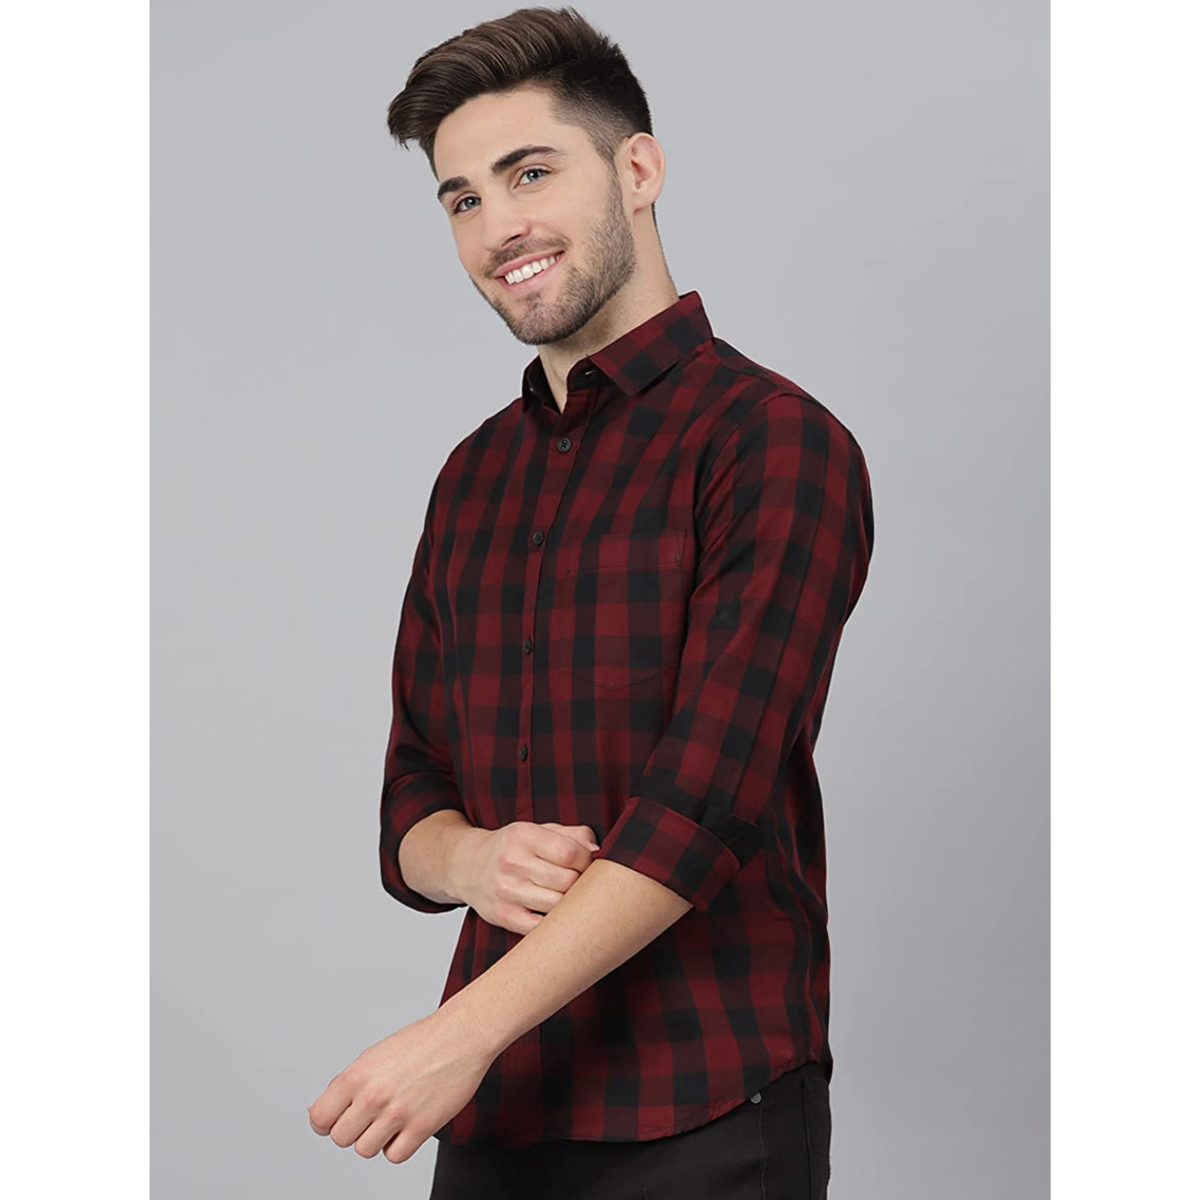 https://img.etimg.com/thumb/width-1200,height-1200,imgsize-833344,resizemode-75,msid-97430925/top-trending-products/lifestyle/find-5-best-checkered-shirts-for-men-in-india.jpg